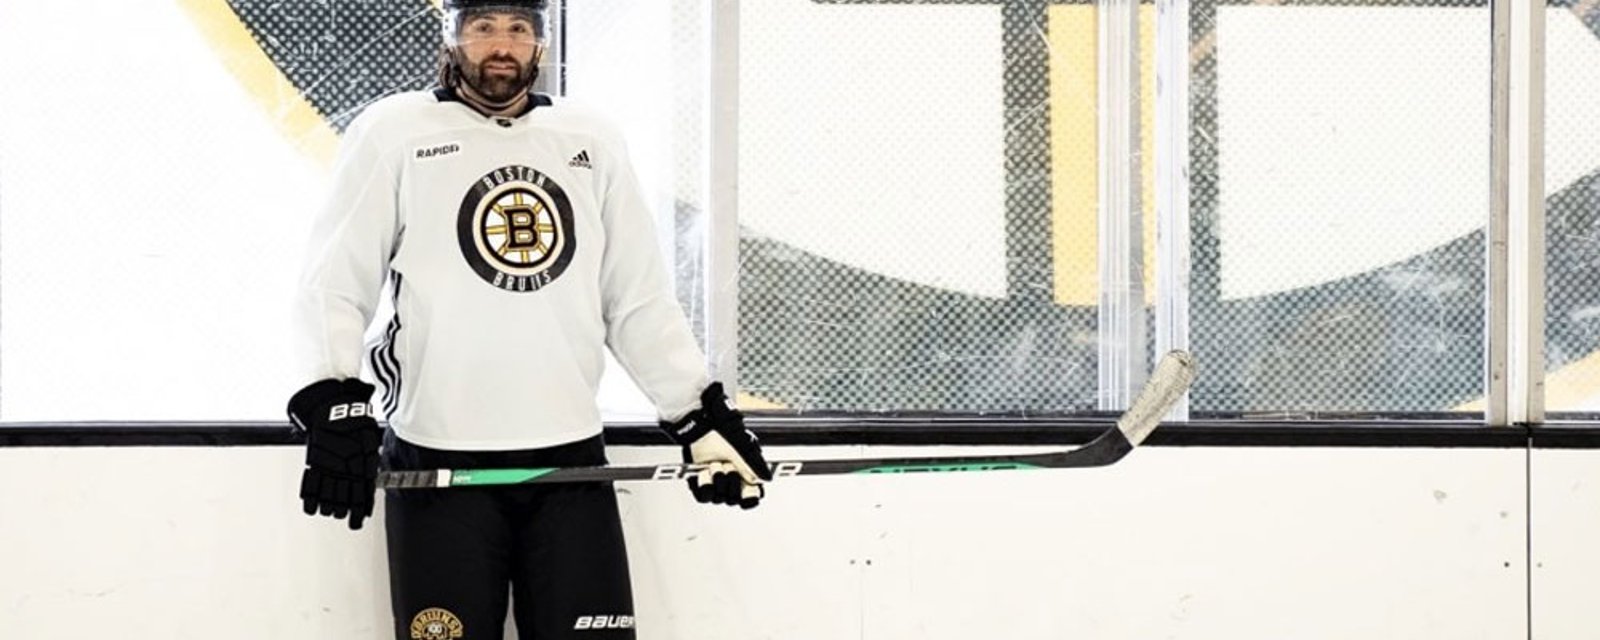 Major update on Pat Maroon from the Bruins today